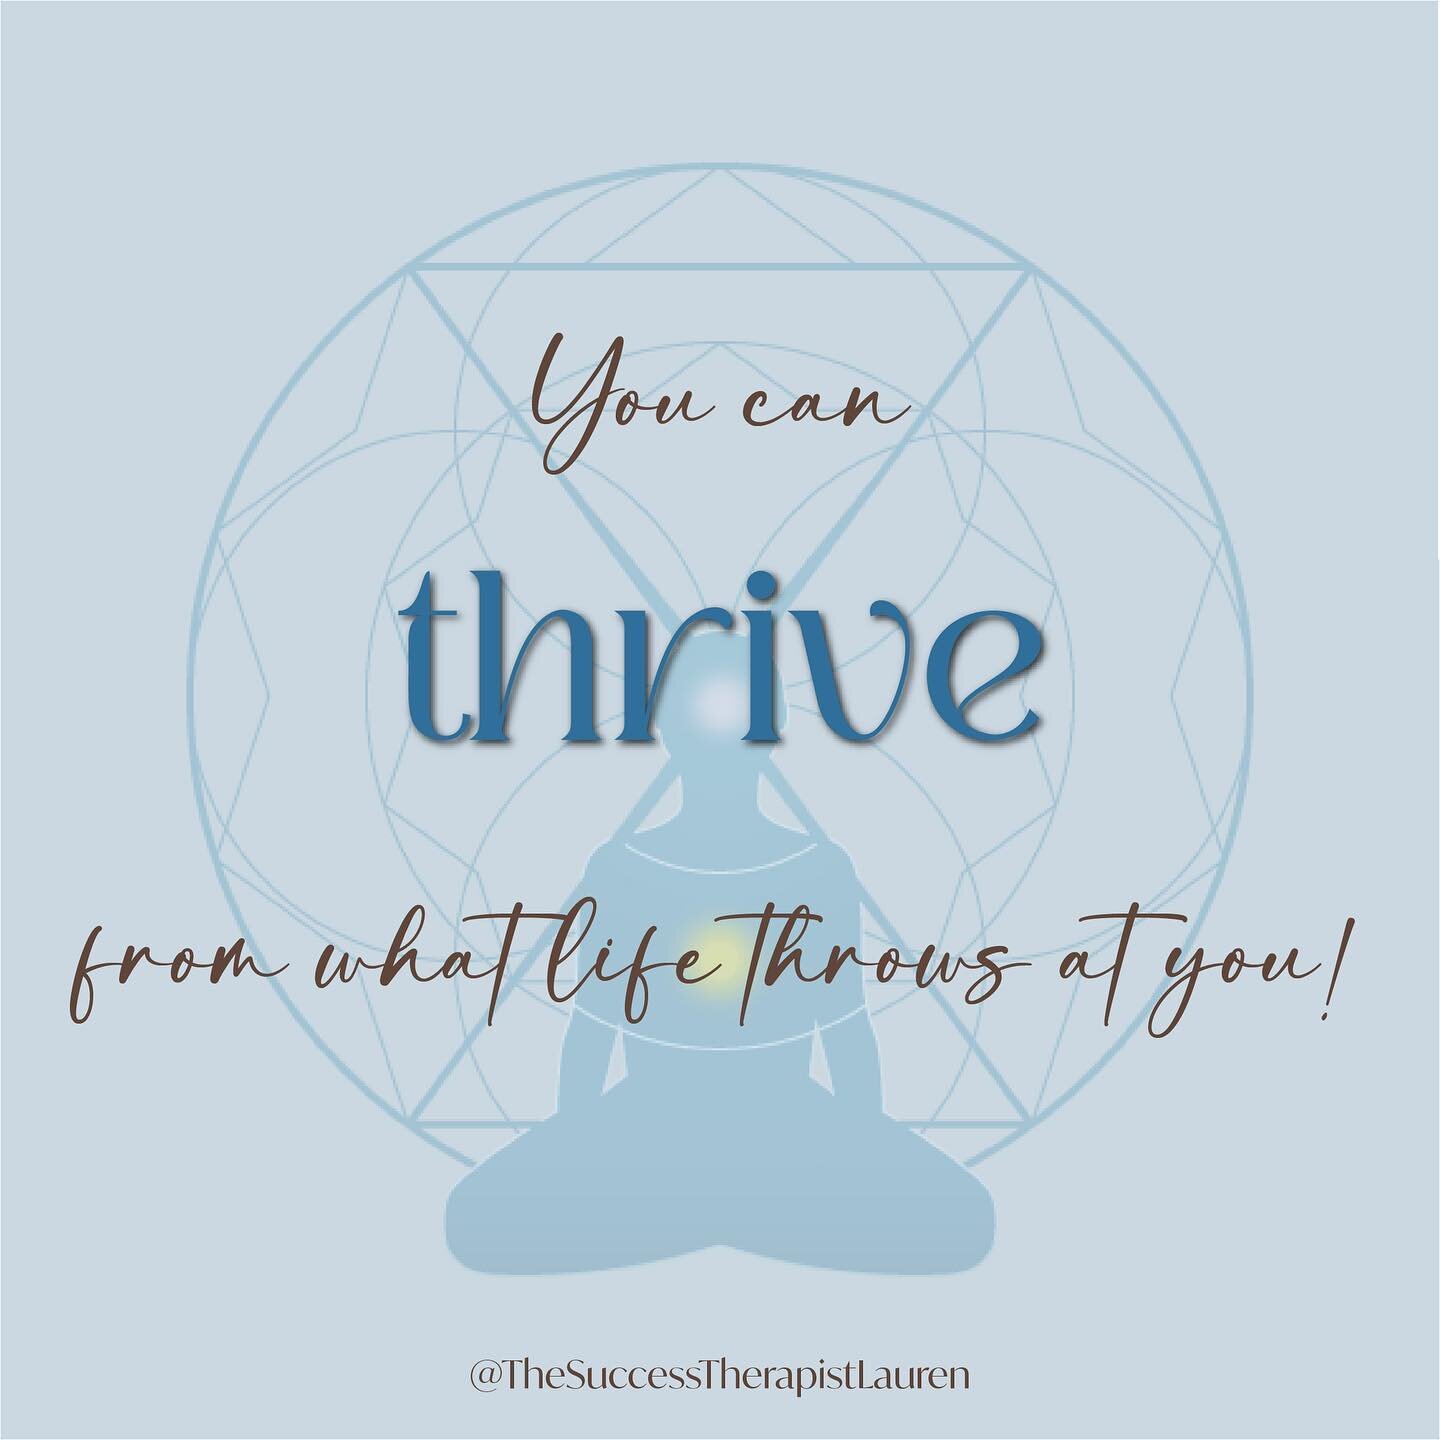 Thrive from what life throws at you!
.
.
.
.
.
.
.
#thrive #thriving #mentalhealth #mentalhealthawareness #successquotes #successmindset #success #anxietyrelief #positivevibes #positivequotes #positivemindset #therapistsofinstagram #therapyiscool #th